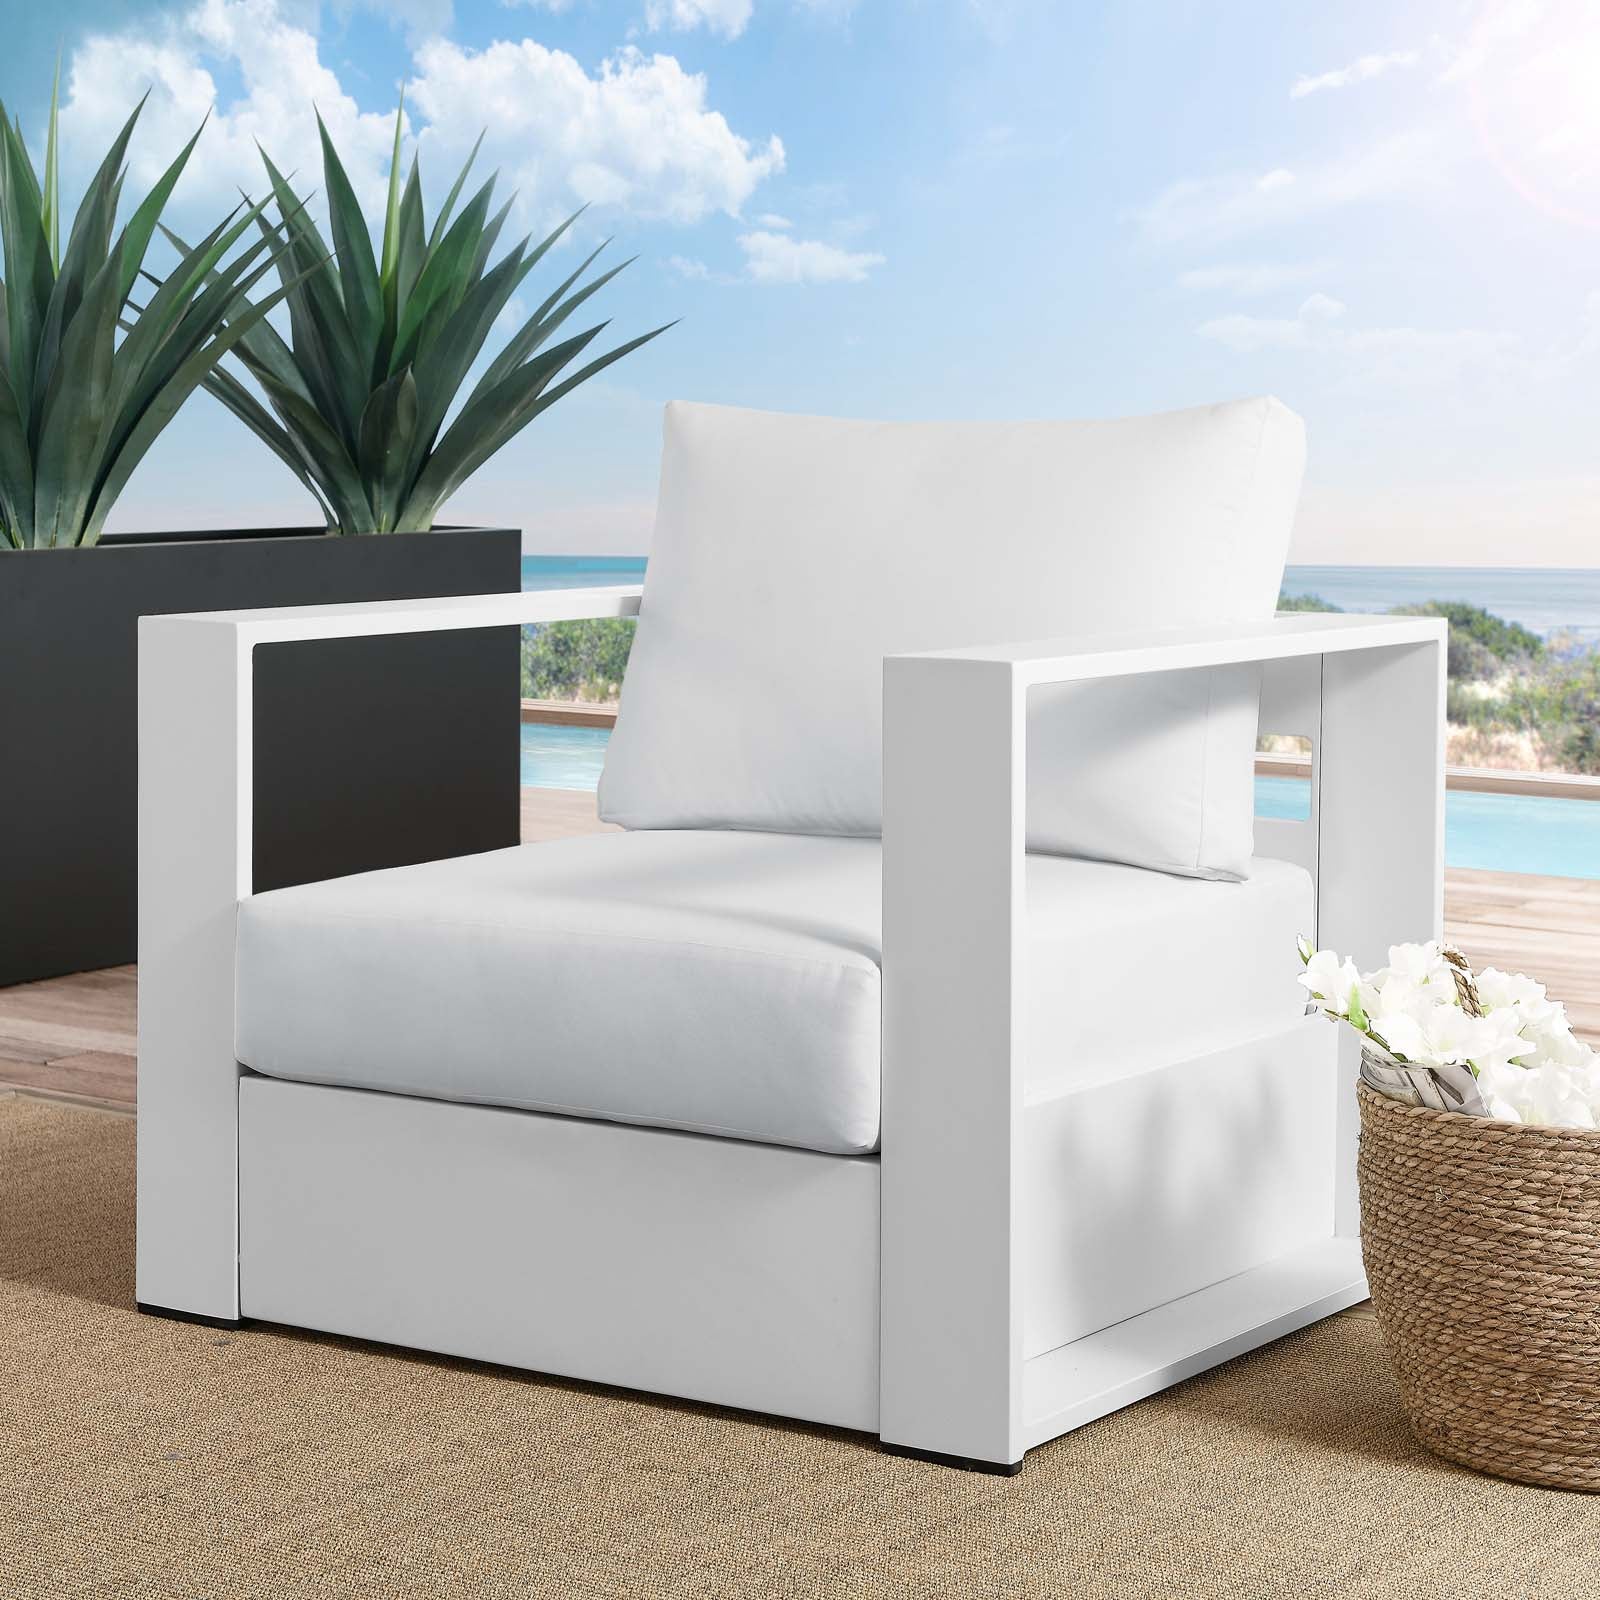 Tahoe Outdoor Patio Powder-Coated Aluminum Armchair-Outdoor Chair-Modway-Wall2Wall Furnishings